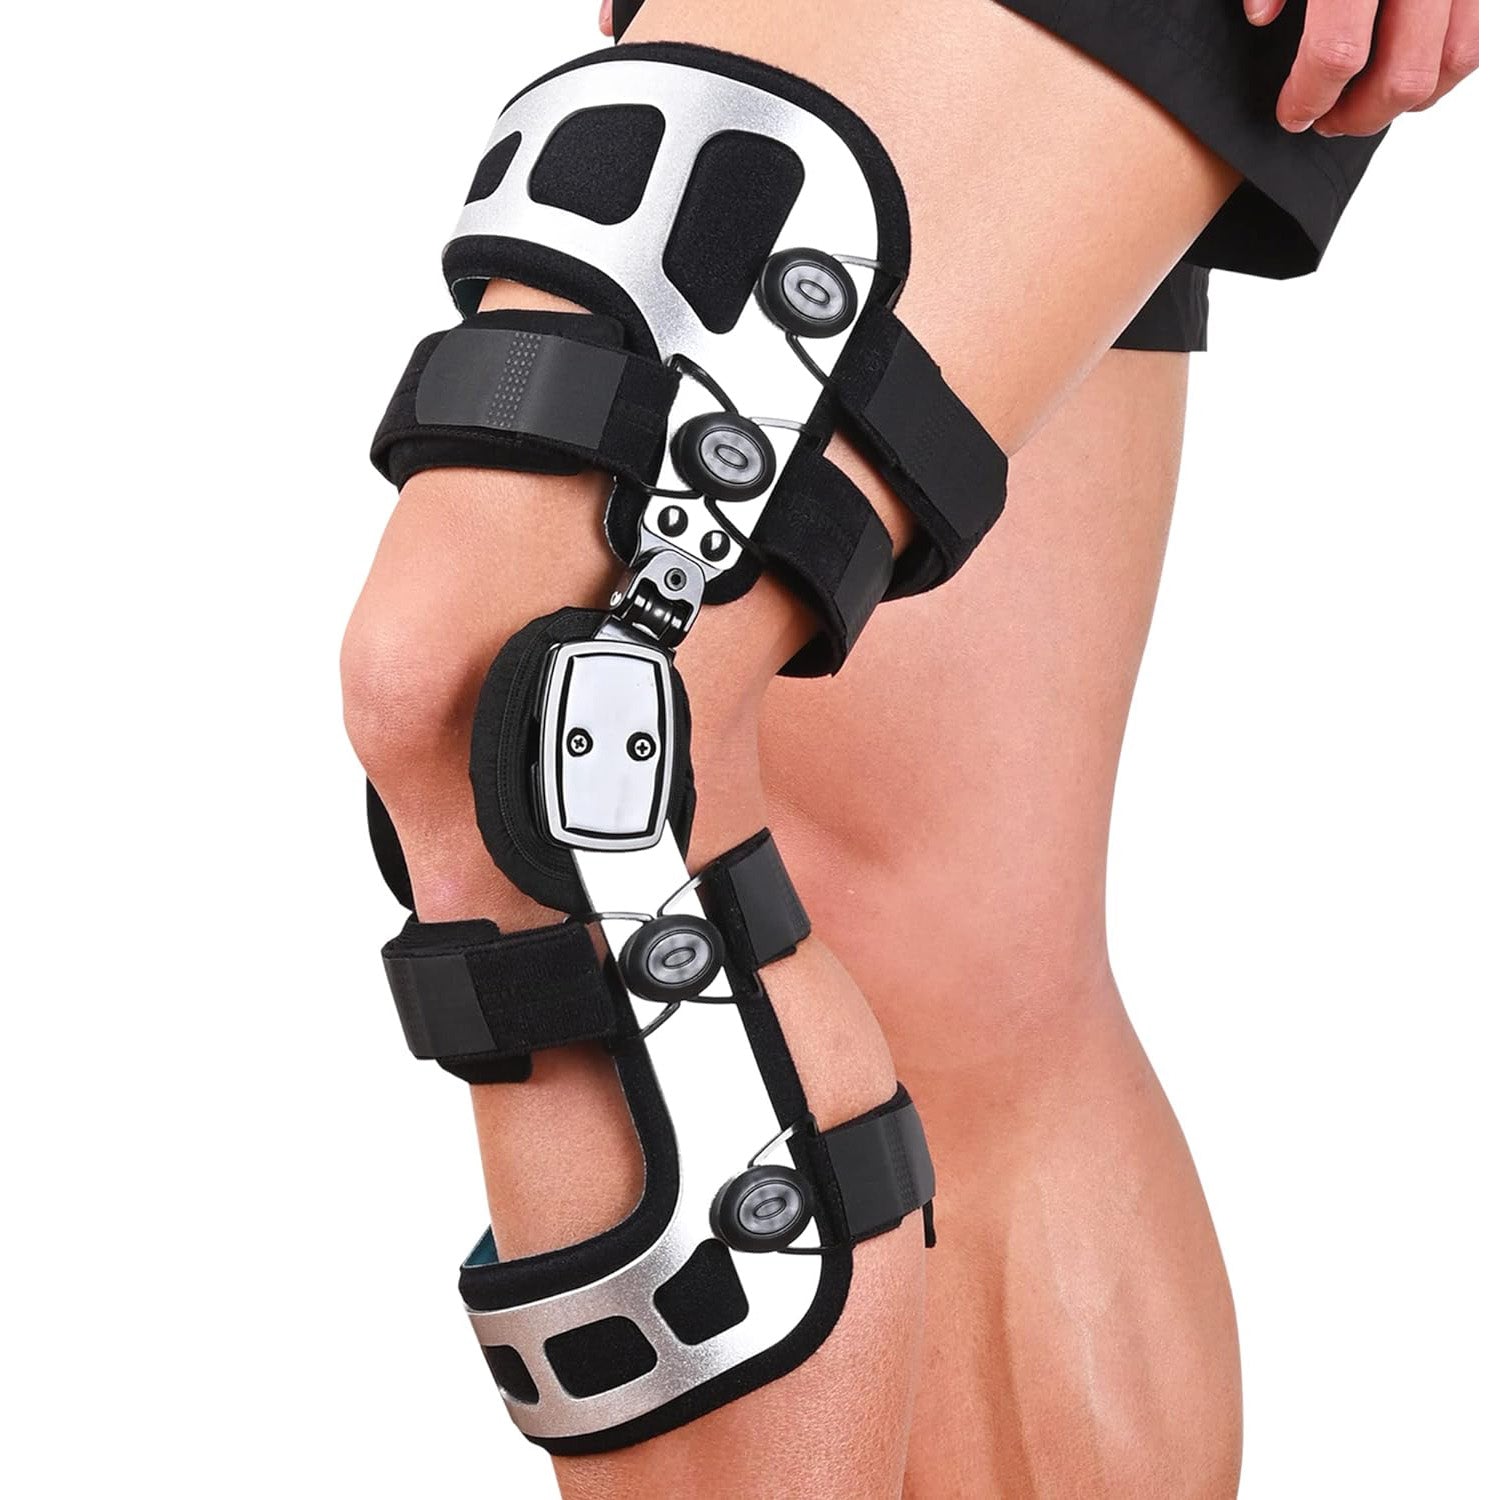 OA Knee Brace Relief for Ligament, Meniscus Injuries